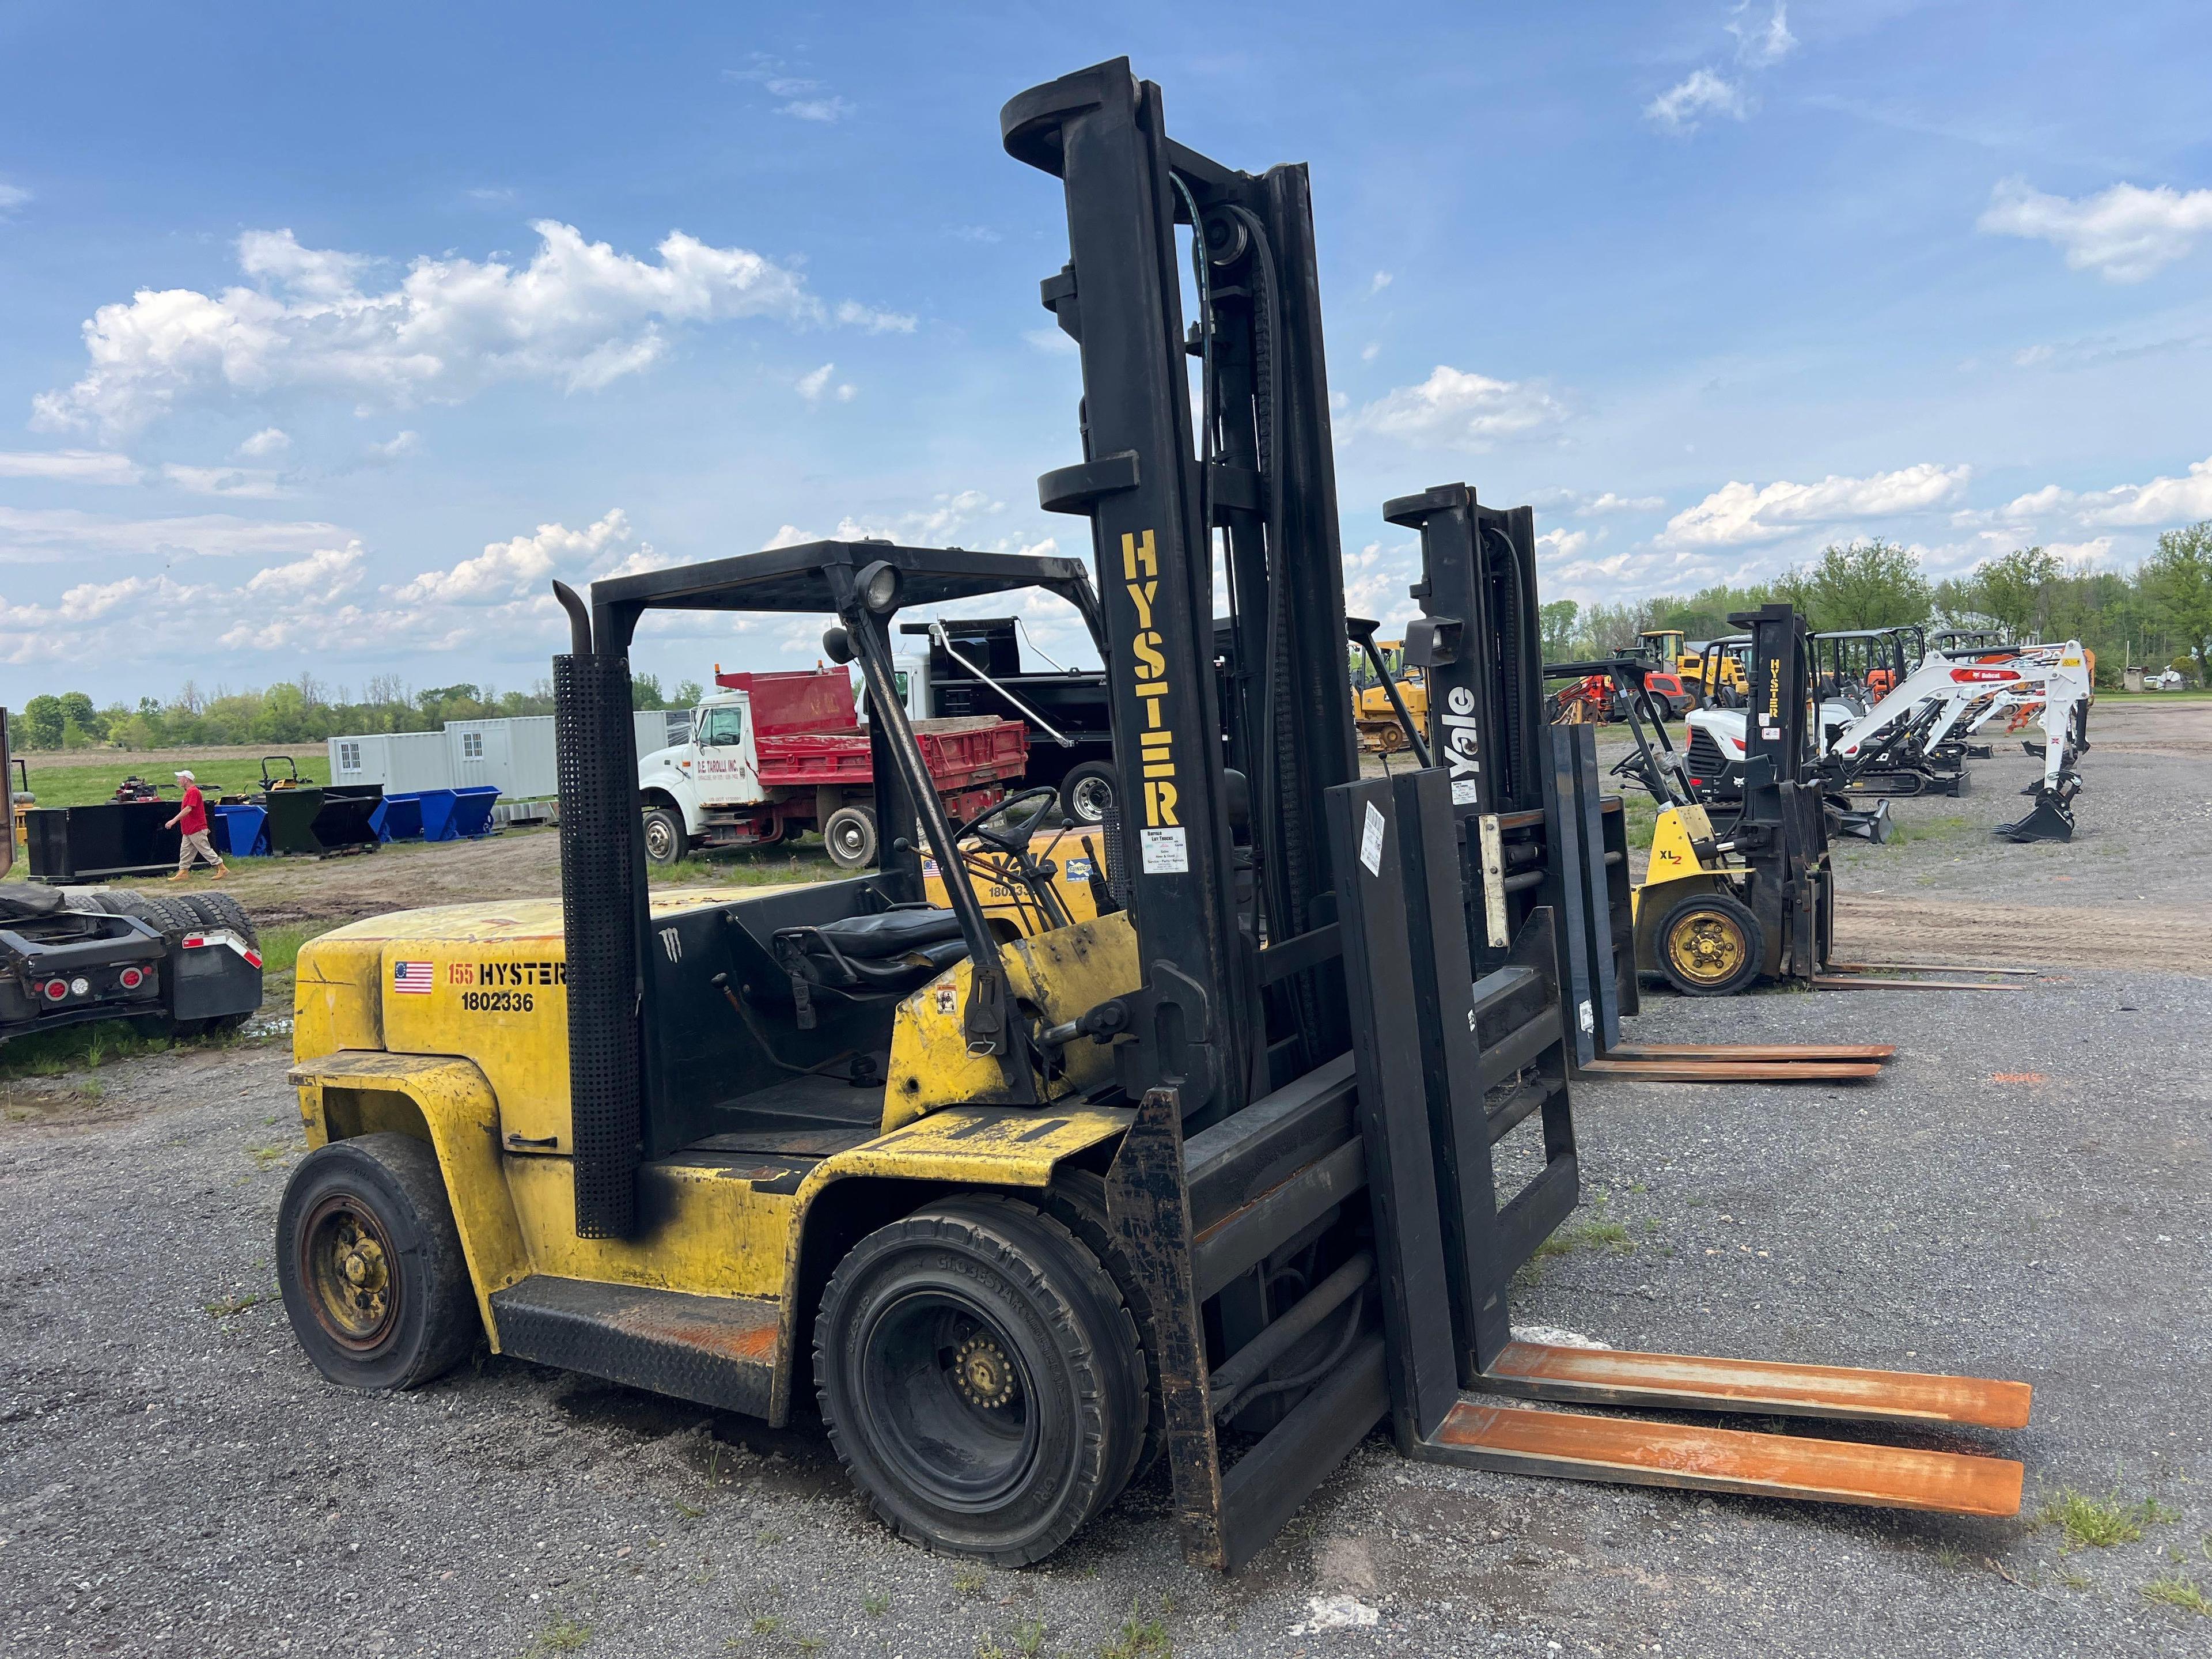 HYSTER H155XL2 FORKLIFT SN:3486K powered by diesel engine, equipped with OROPS, 15,000lb lift